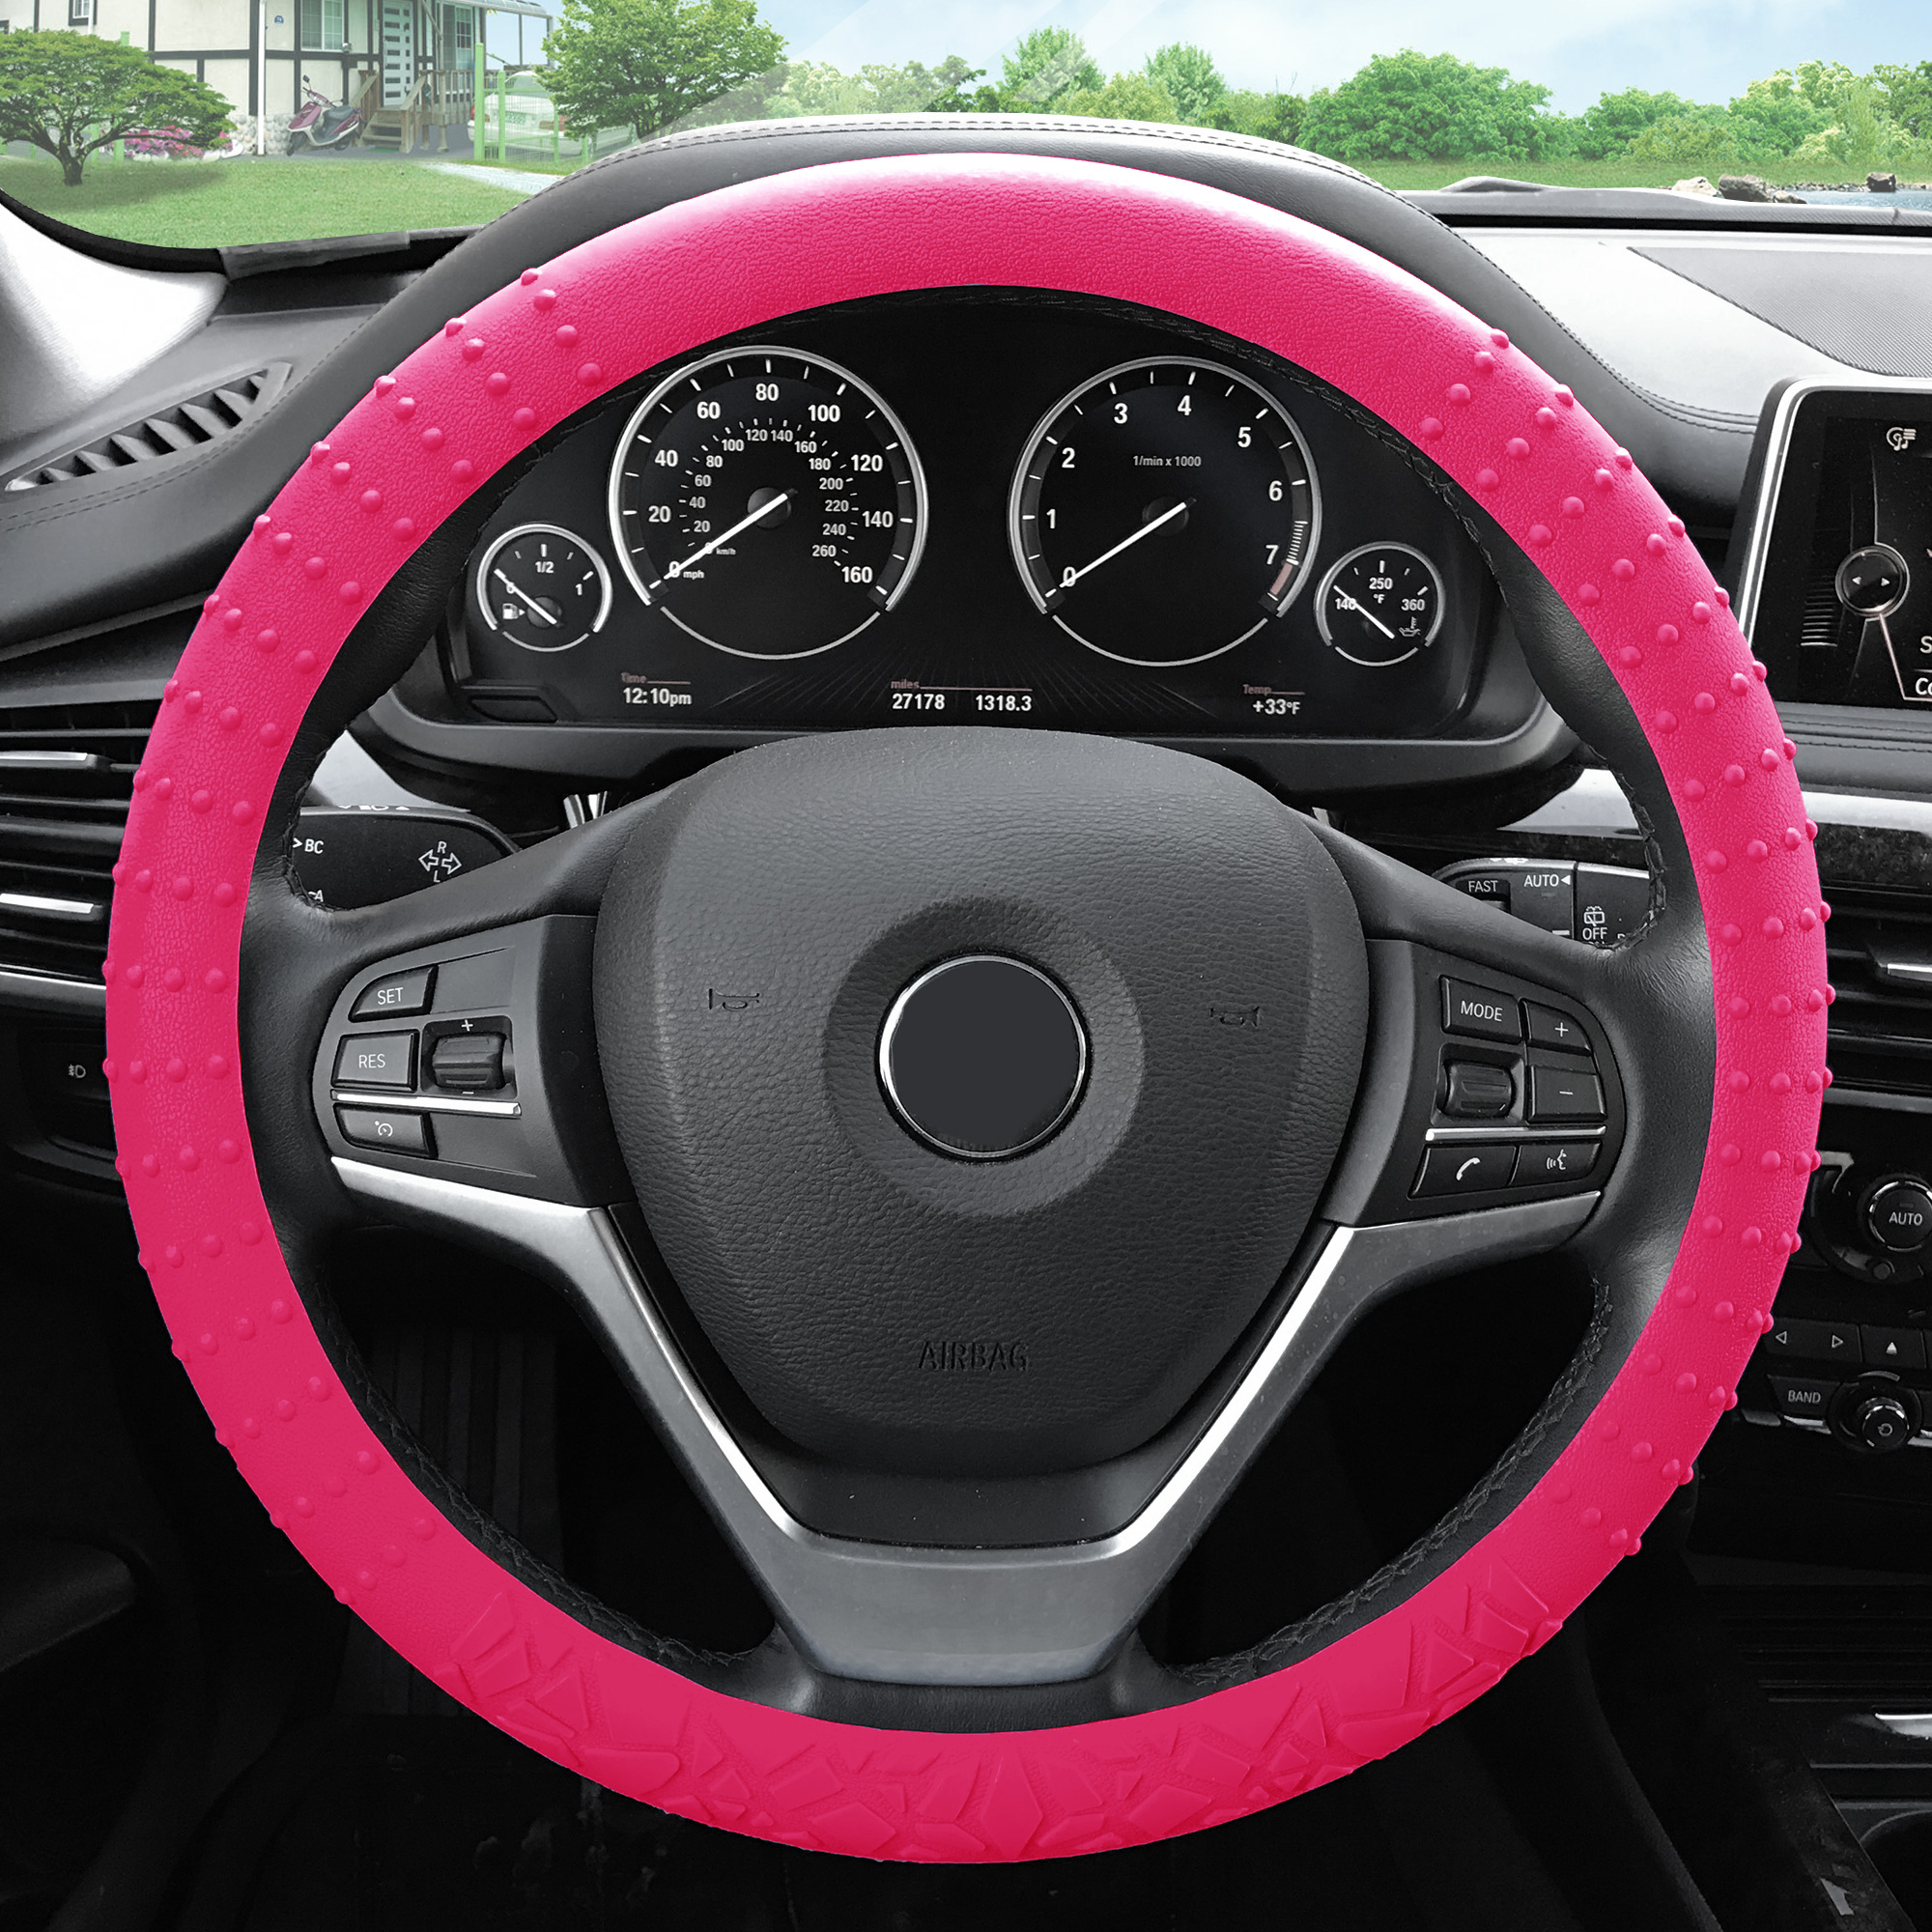 FH Group Silicone Steering Wheel Magenta Cover and Phone holder 1 lb. with Air Freshener - image 2 of 4